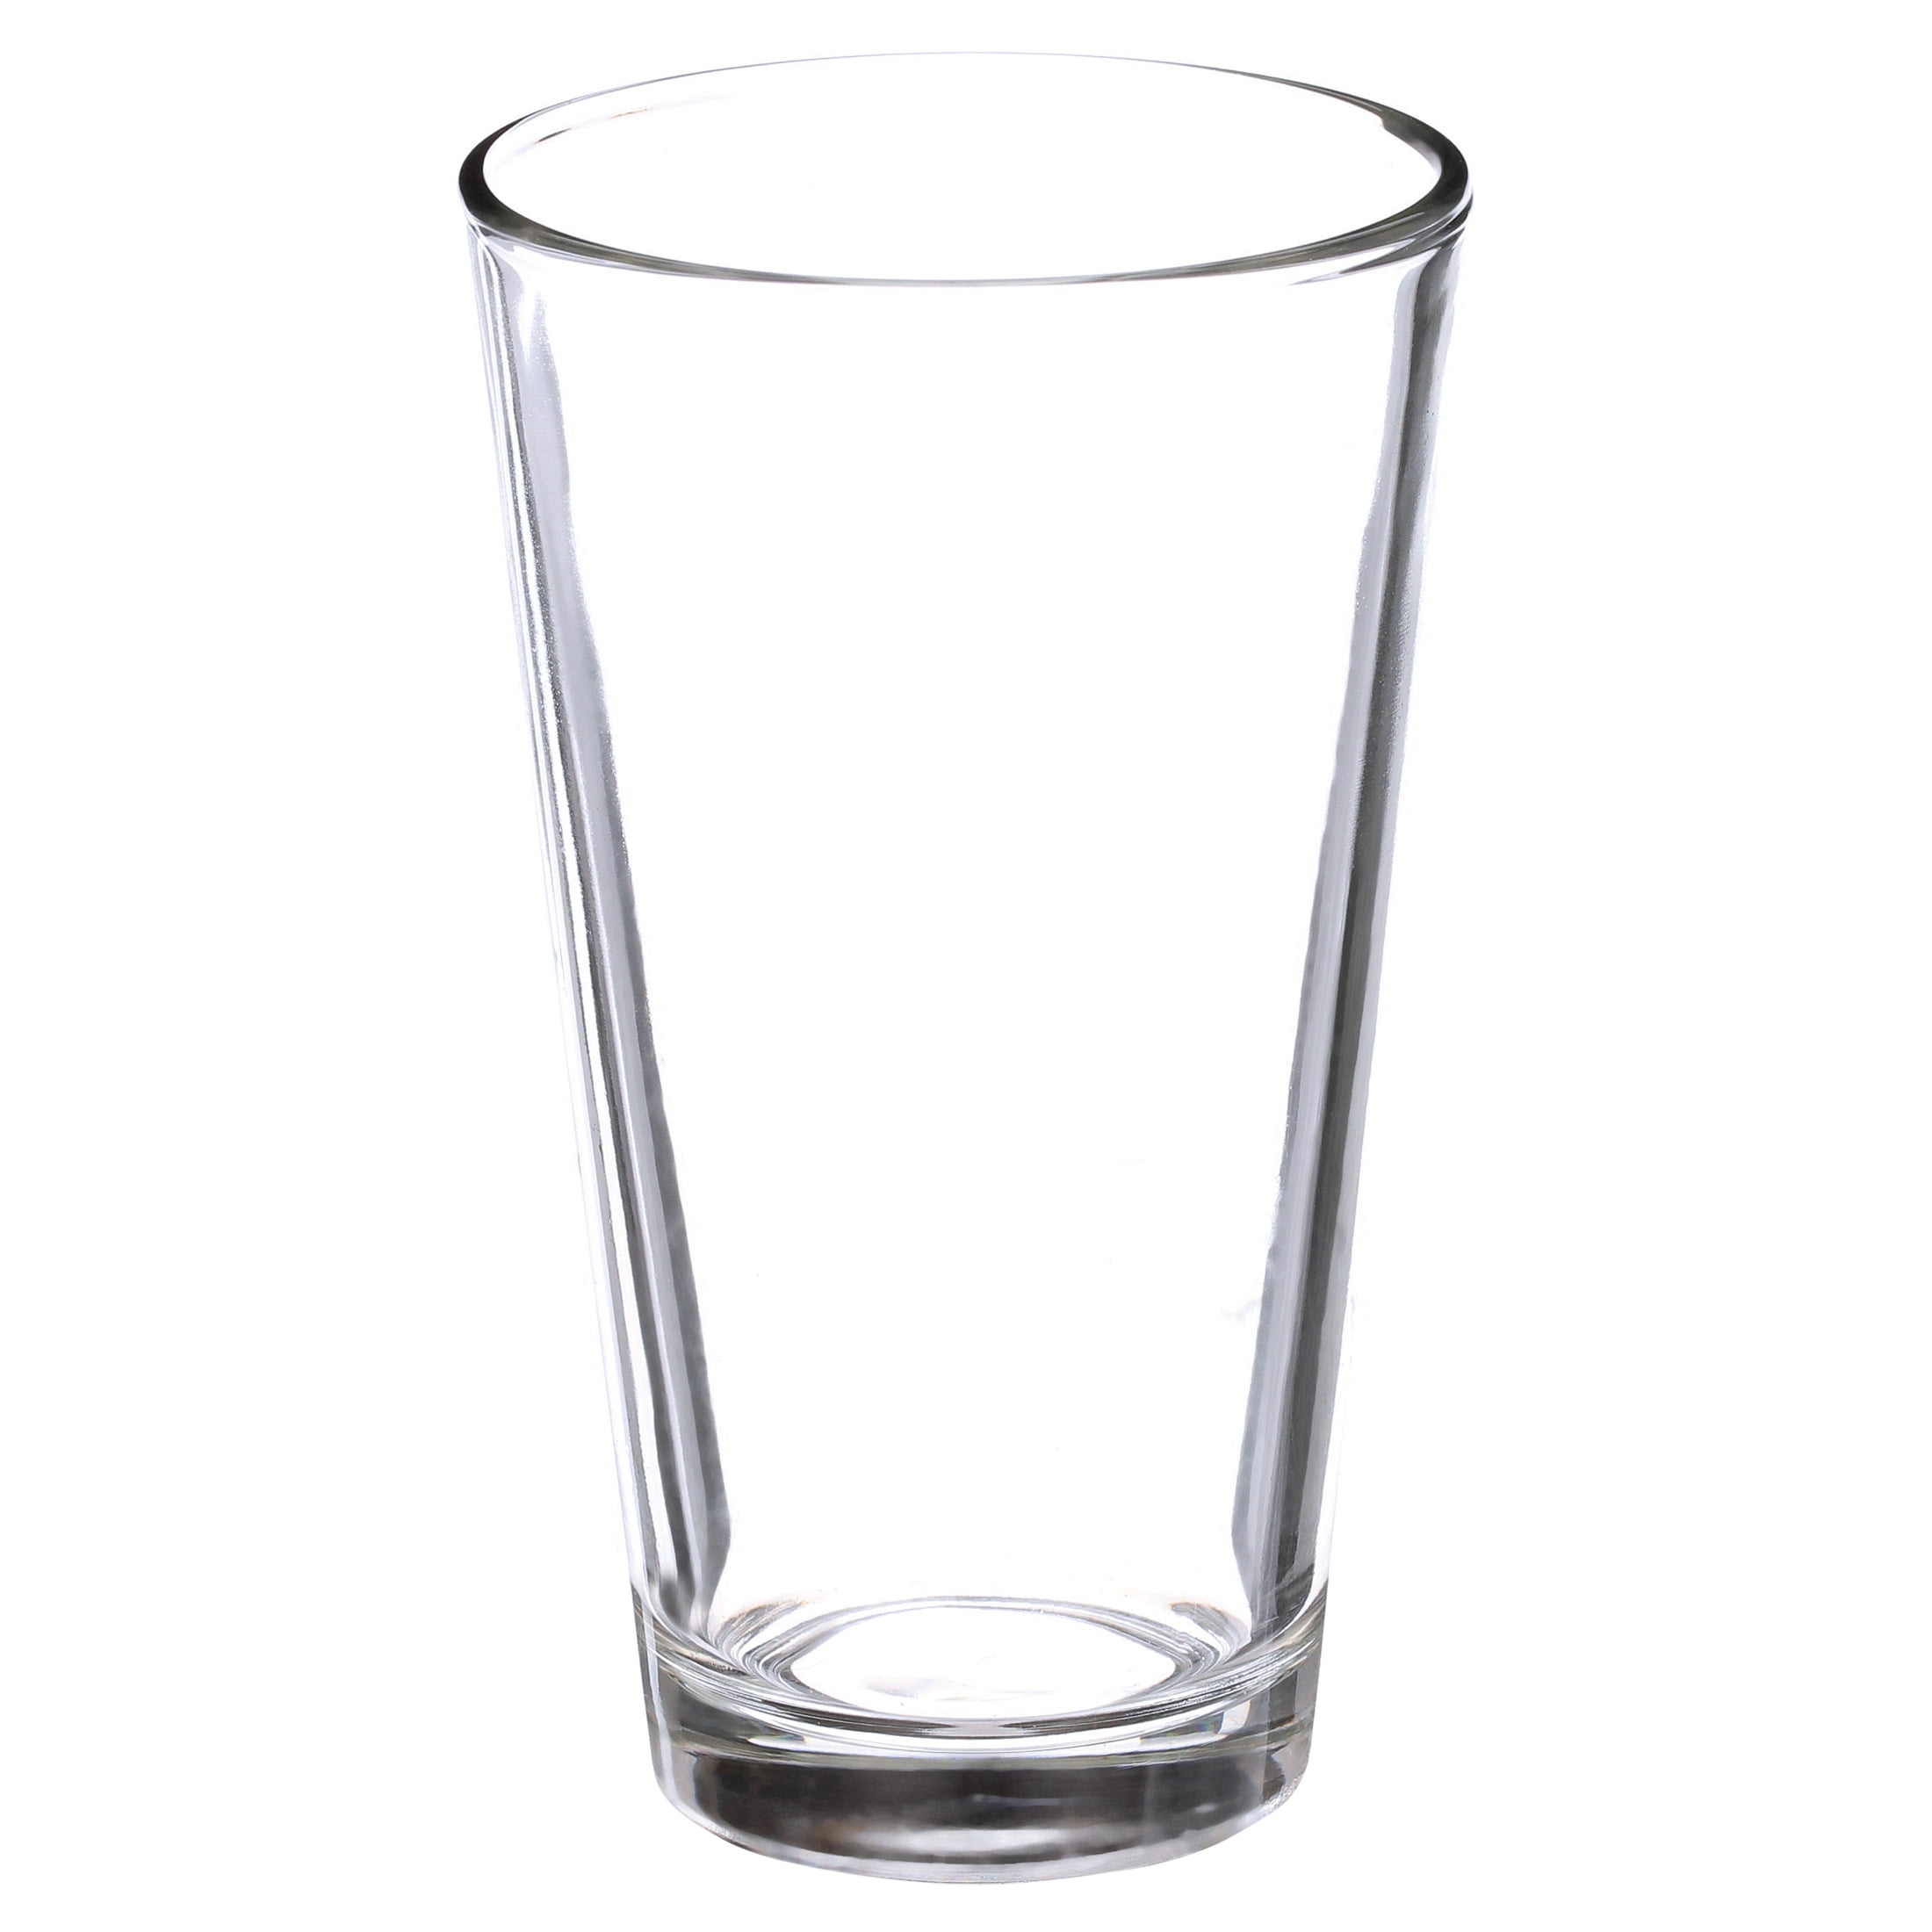 16oz Pint Glass — Ardent Craft Ales